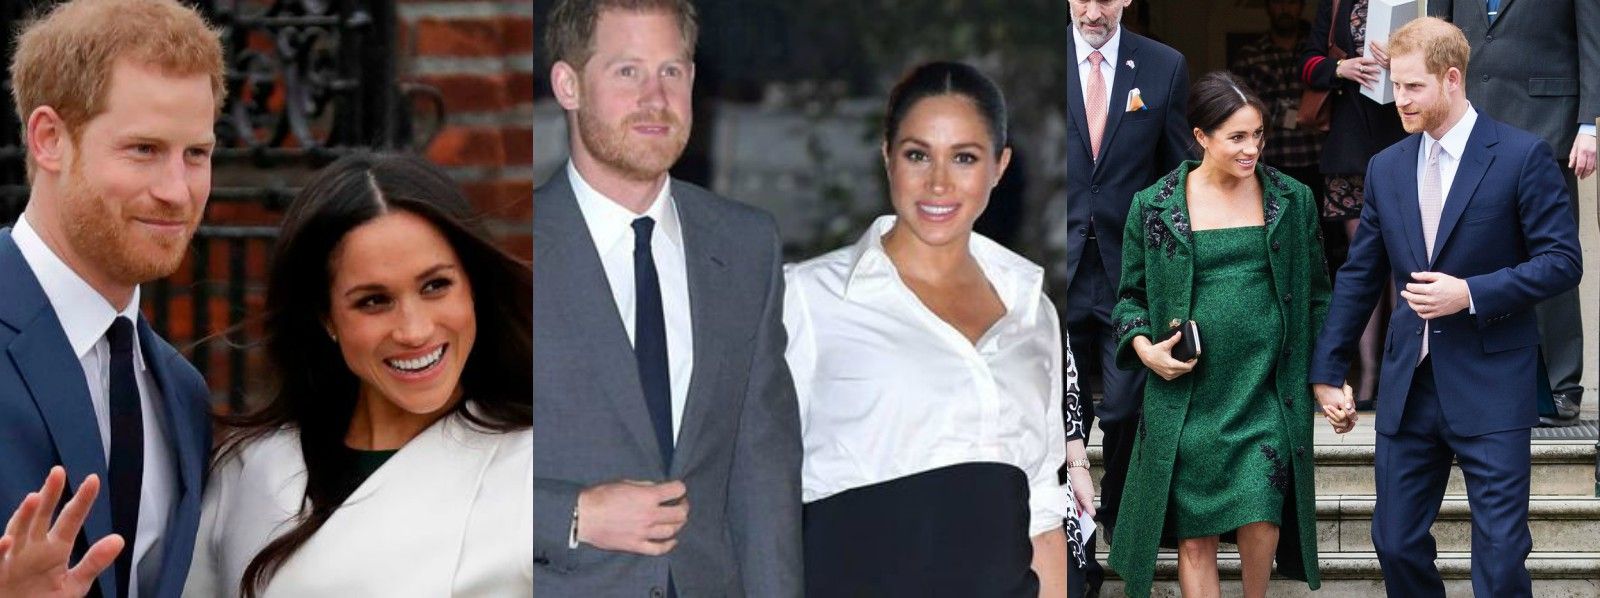 images easyblog articles 7733 harry and meghan baby d0da43fa